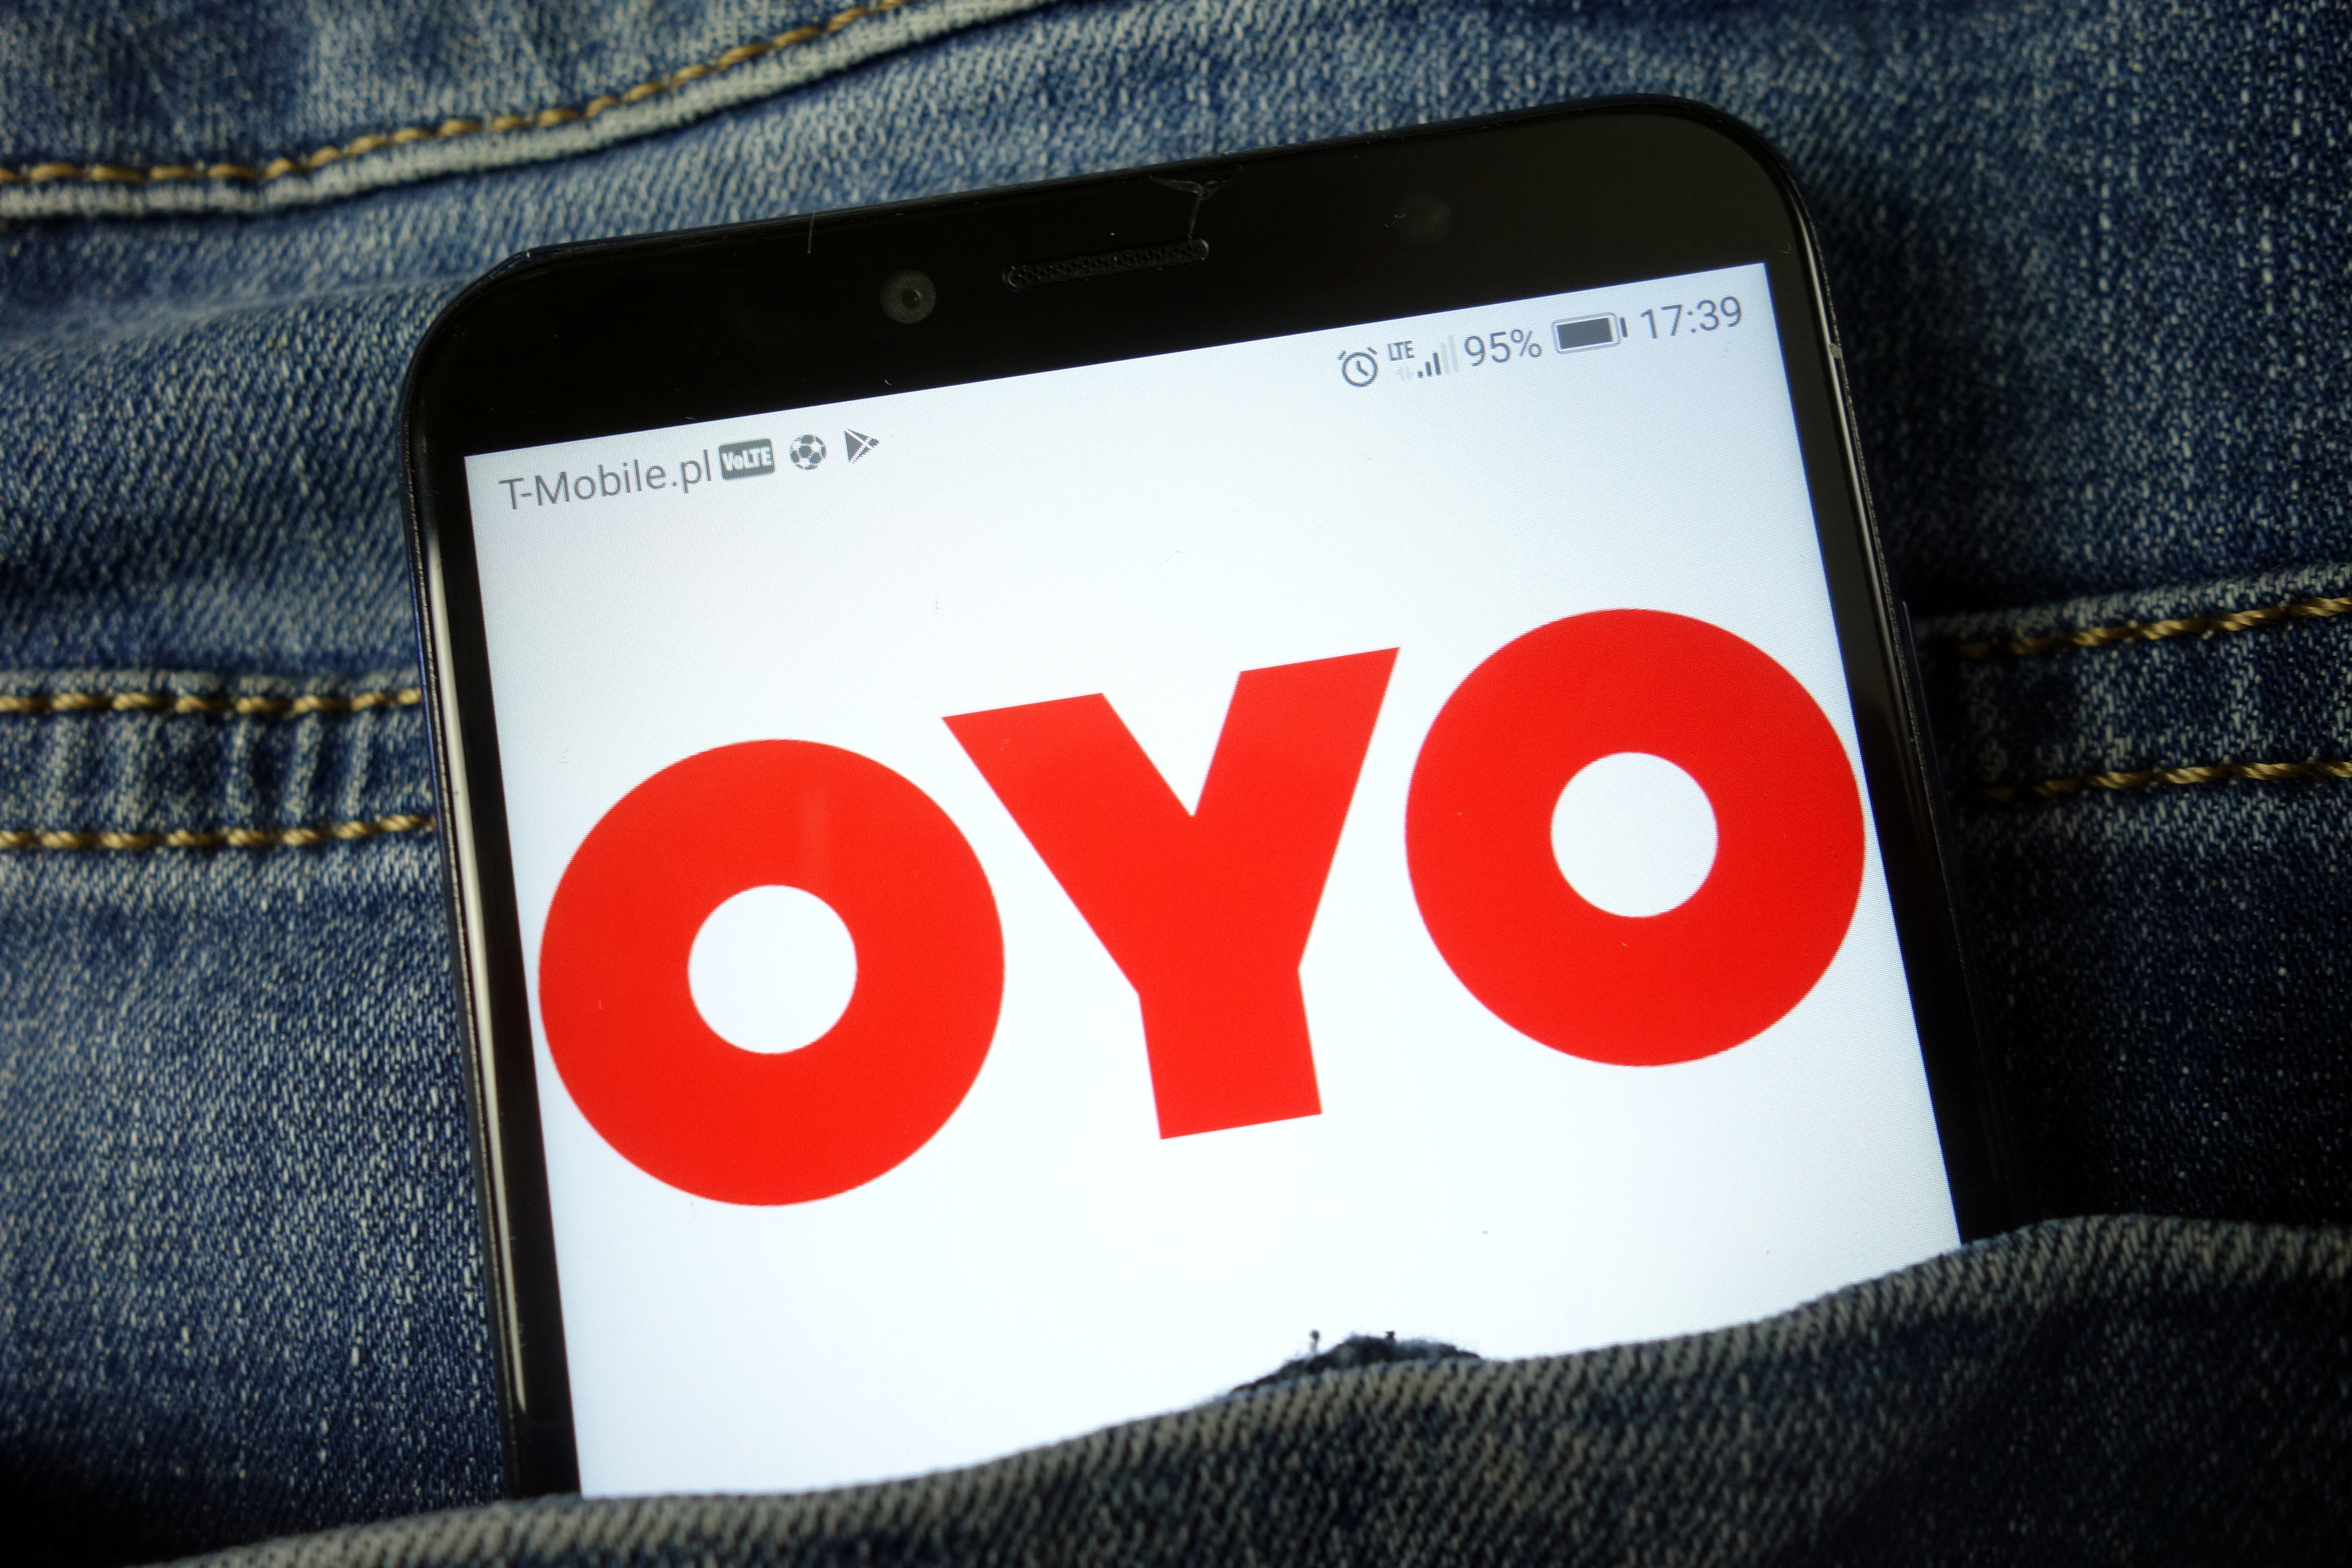 SoftBank-backed Oyo to merge Japan hotel and residential units